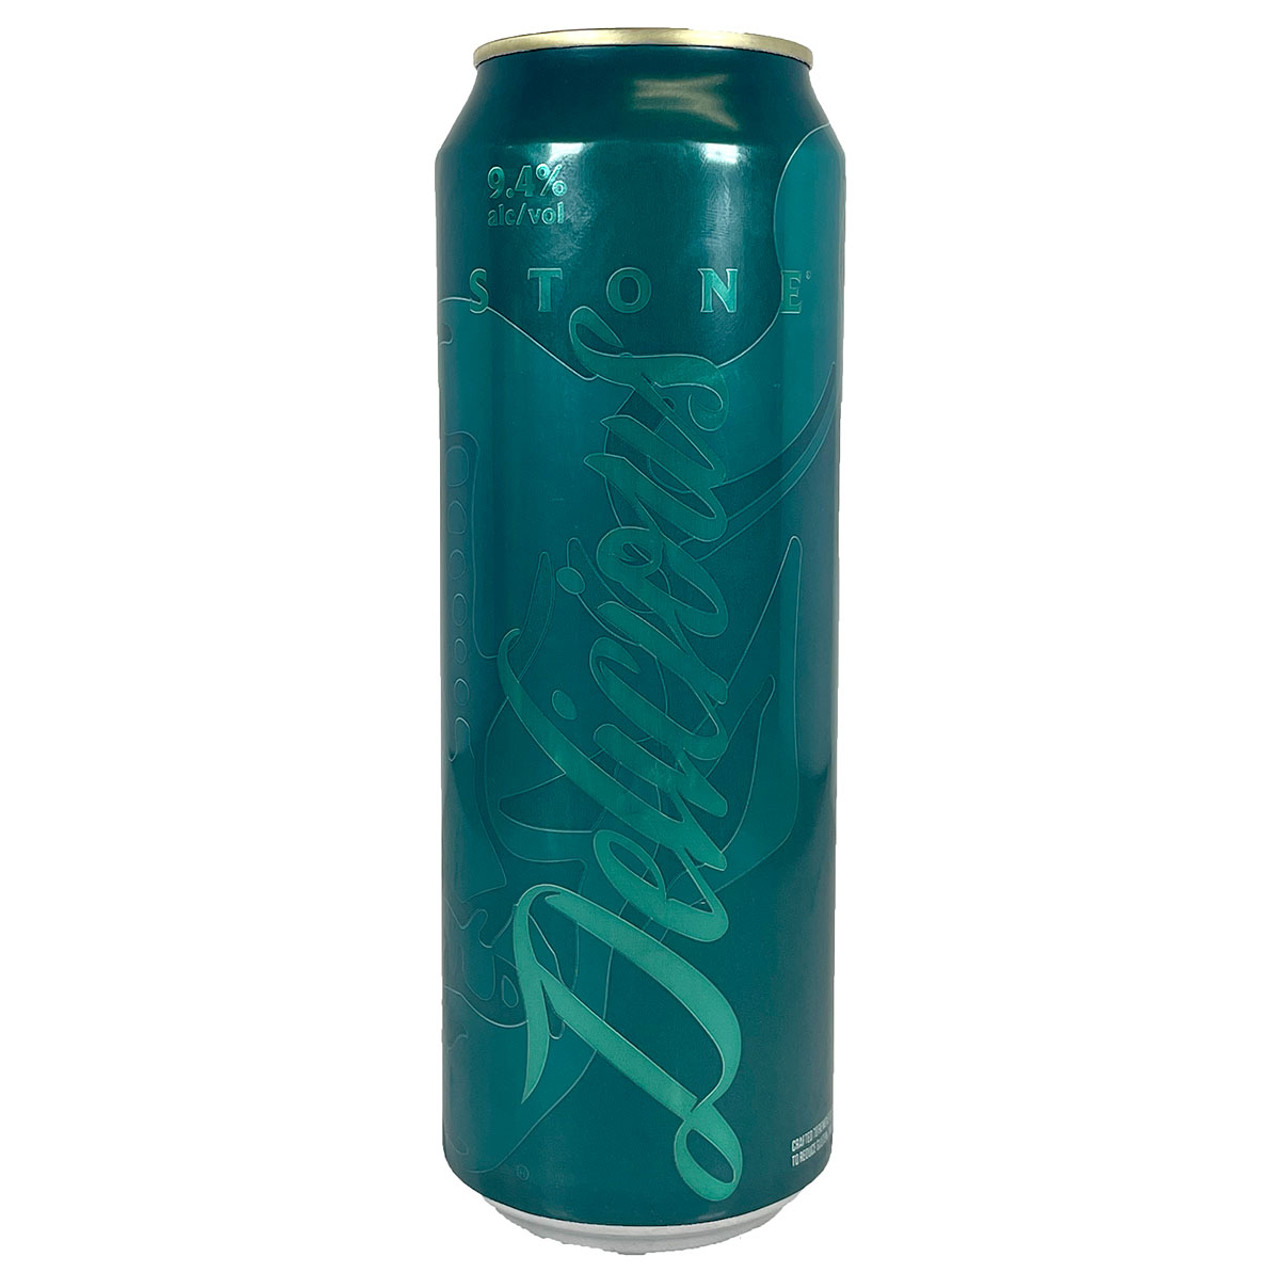 Stone Delicious Double IPA 19.2oz Can - Holiday Wine Cellar